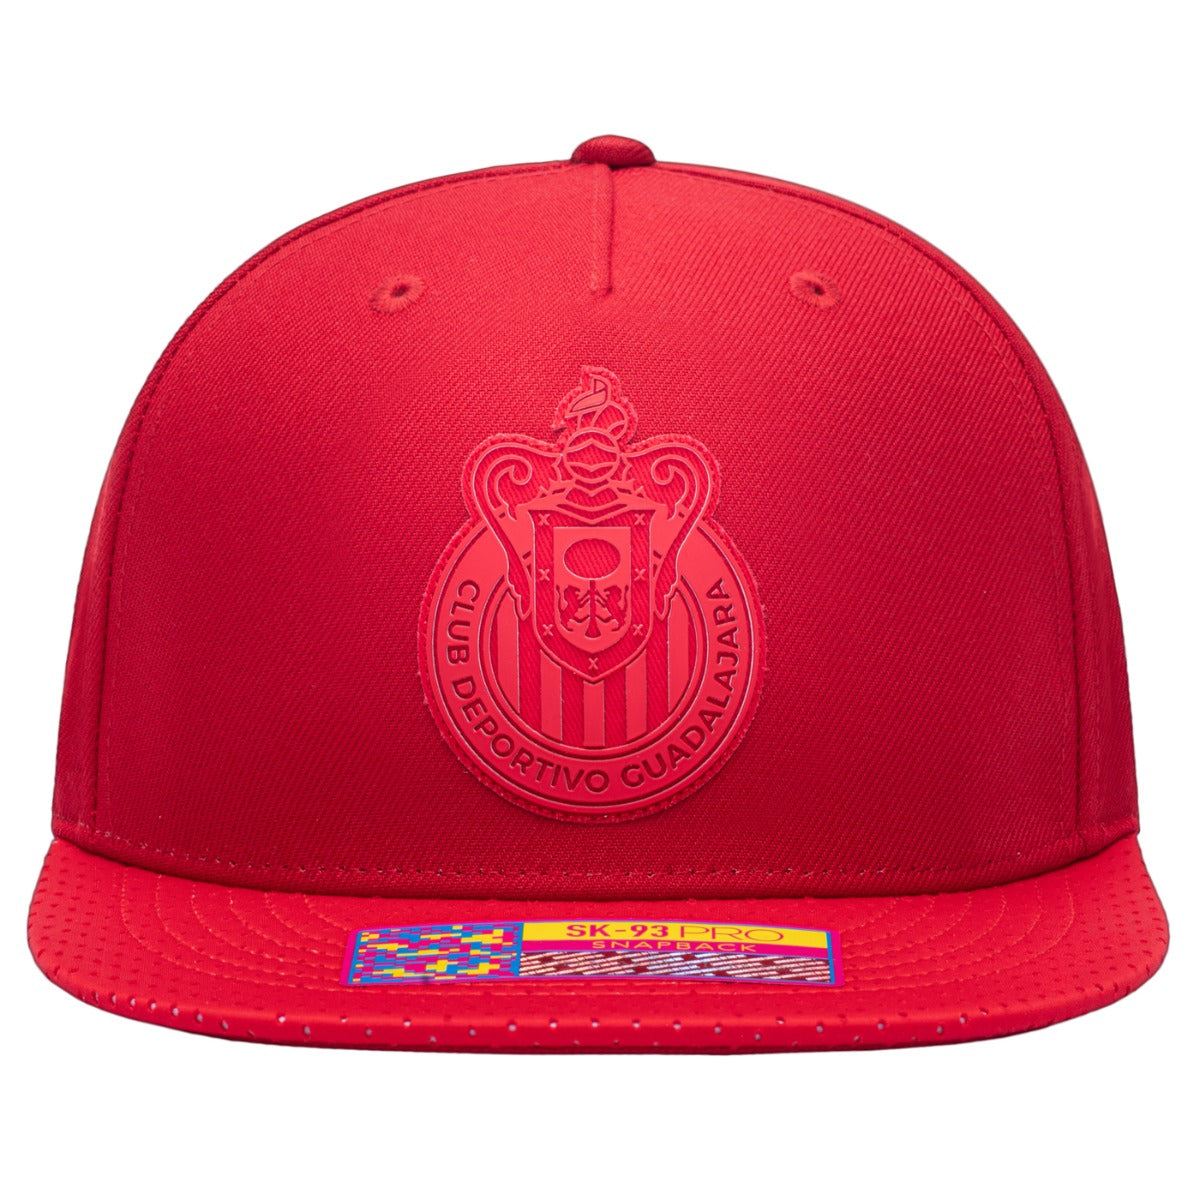 FI Collection Chivas Elite Snapback Hat - Red (Front)